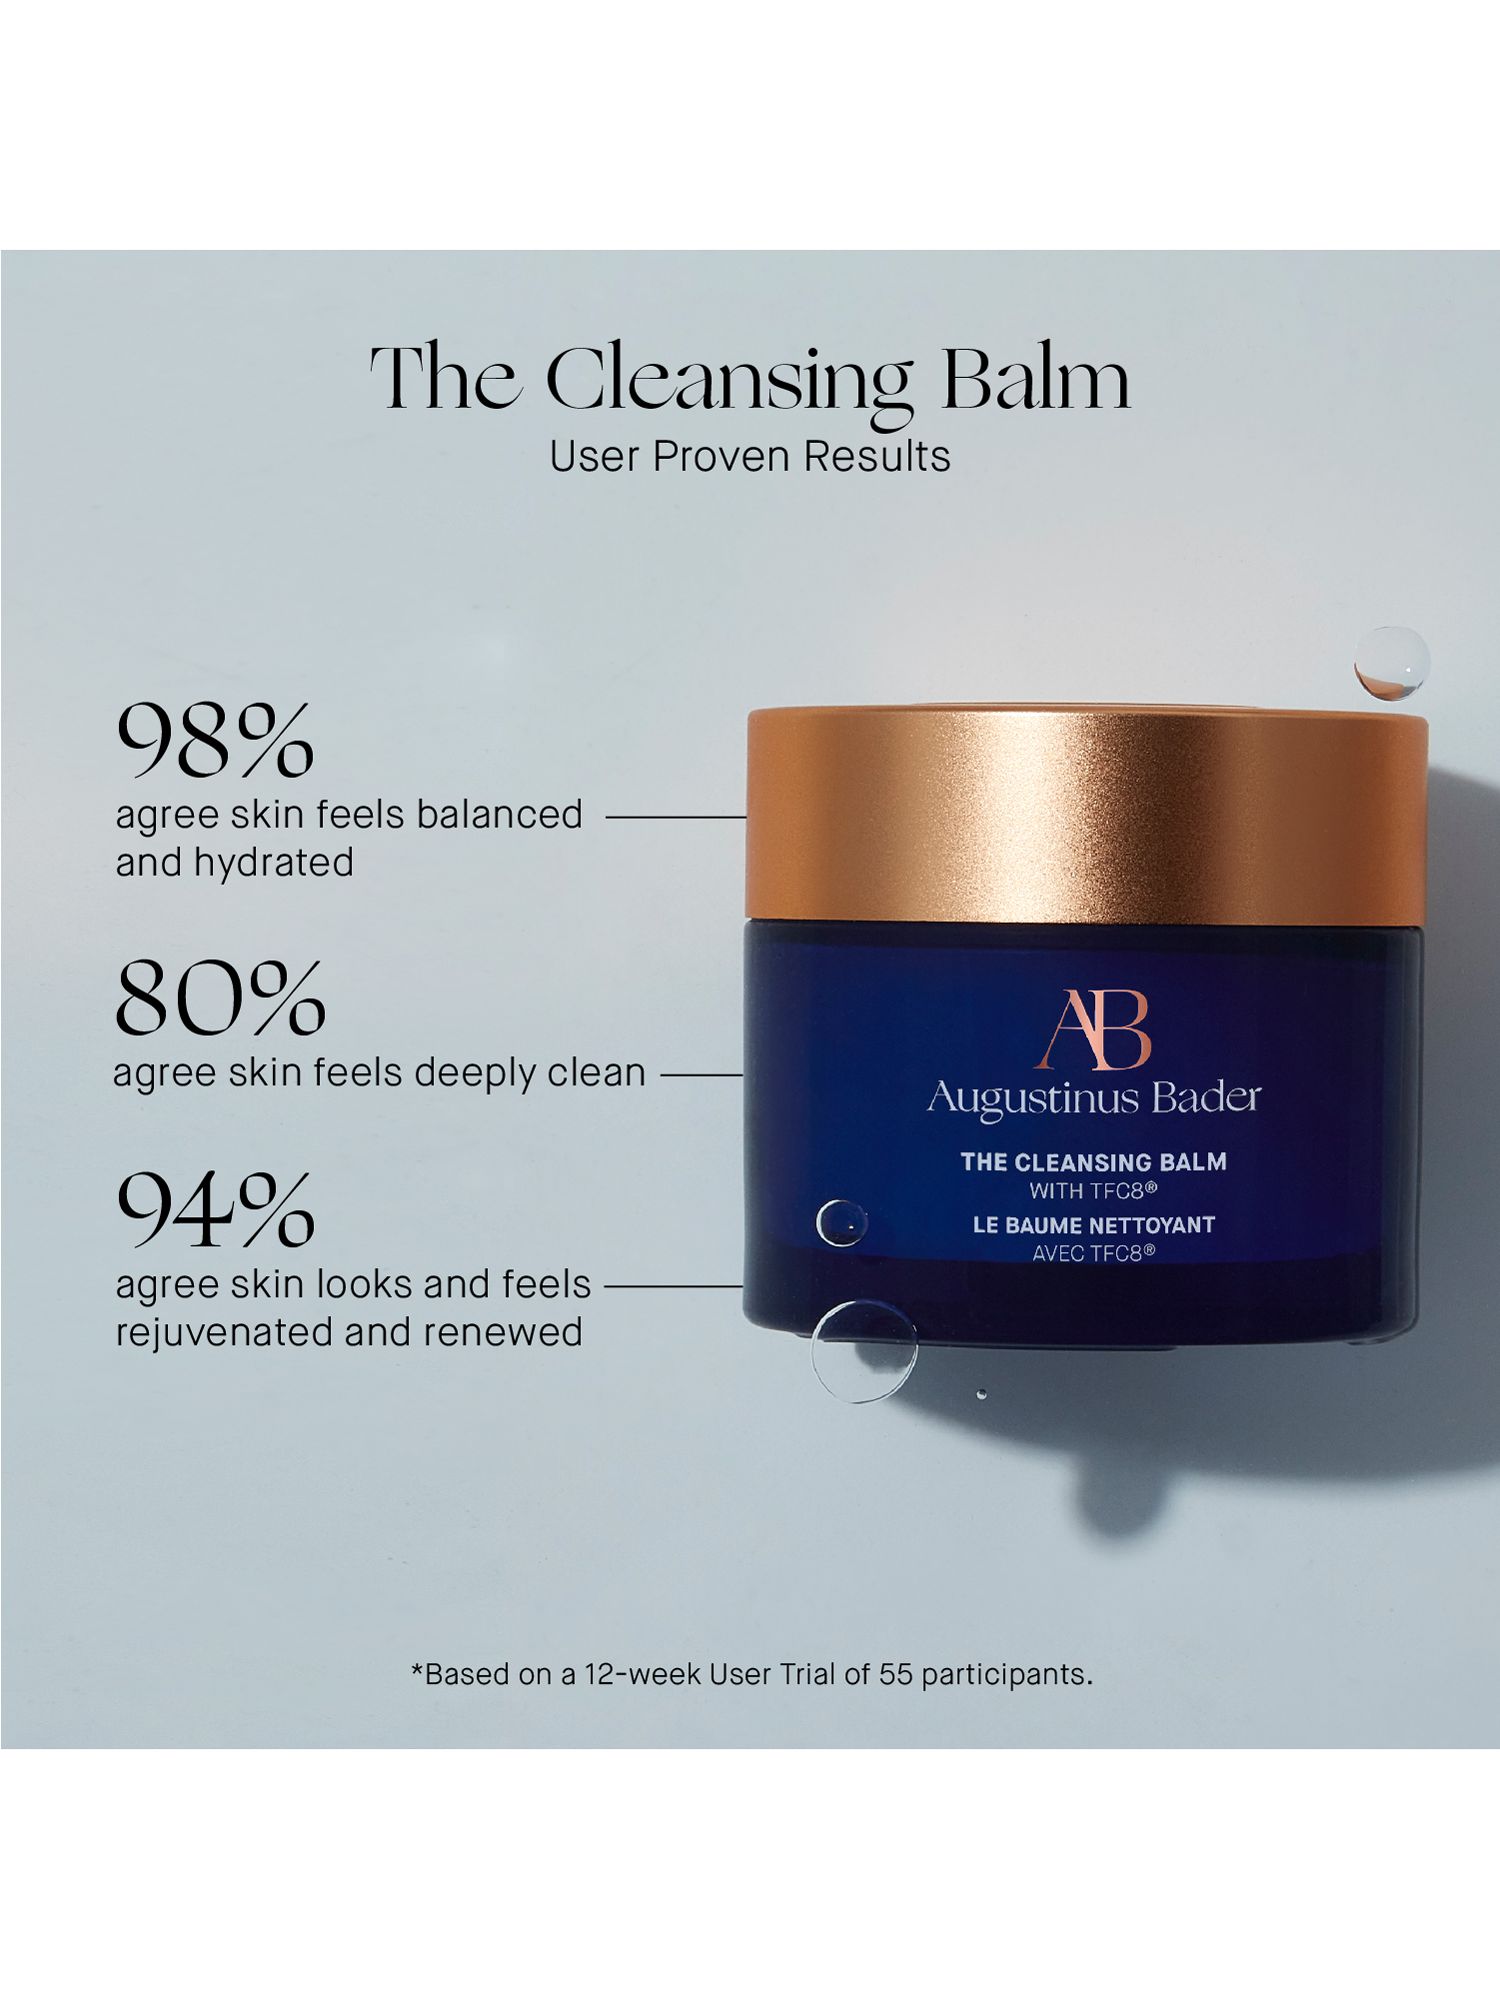 Augustinus Bader The Cleansing Balm, 90g 9